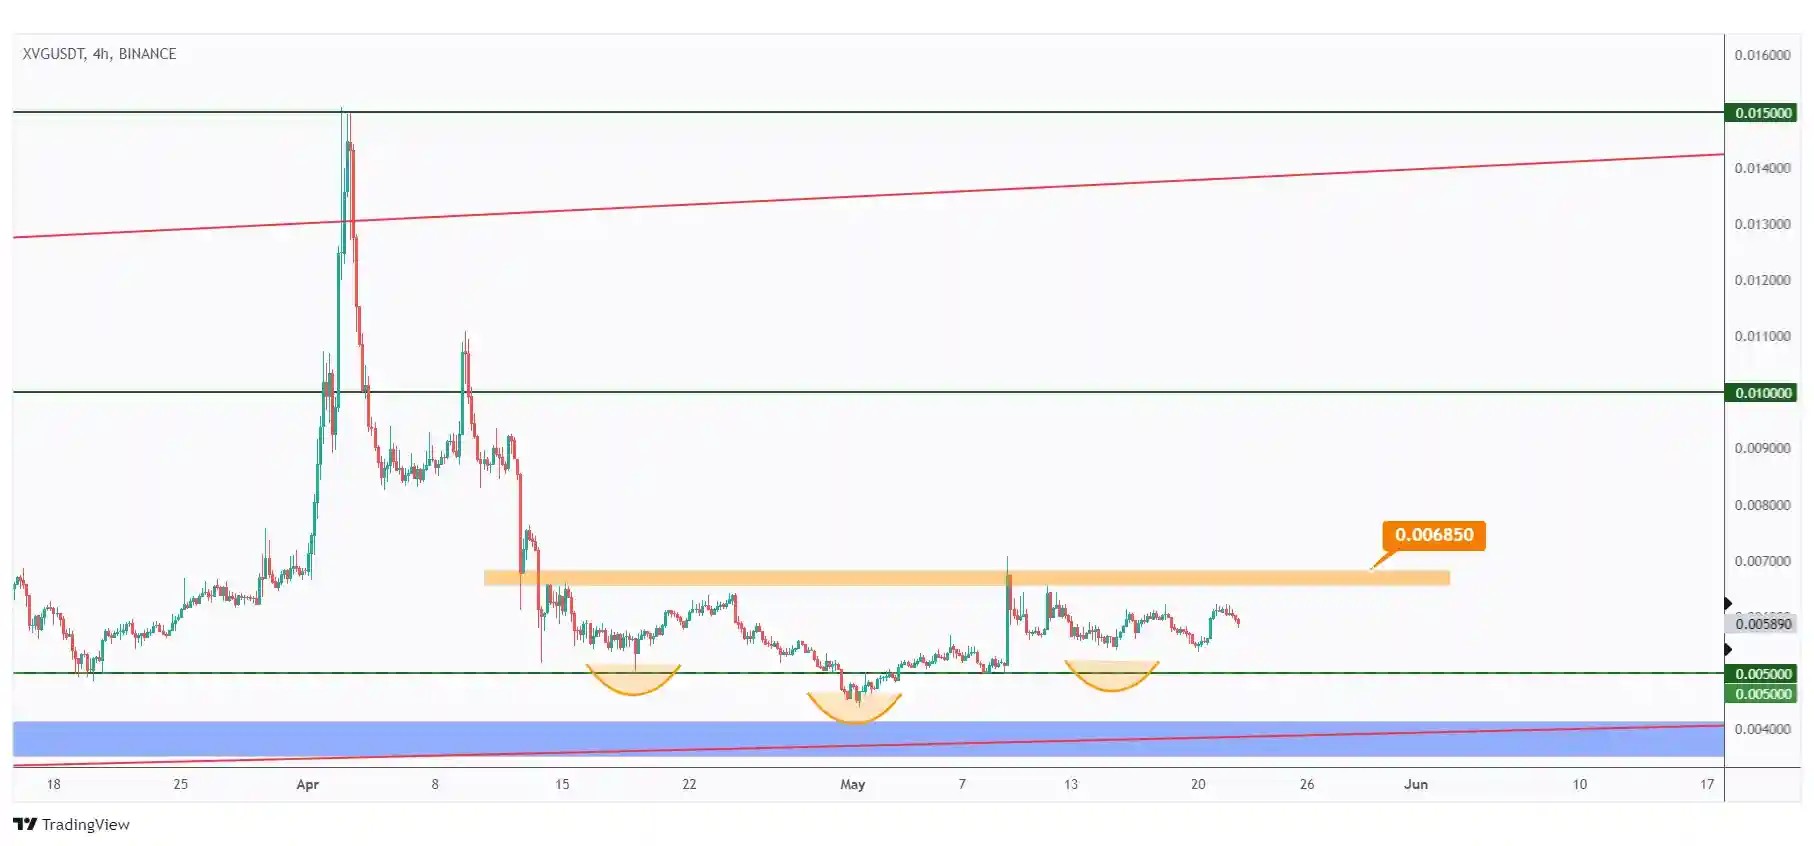 XVG 4h chart showing the last major high at $0.00685 that we need a break above for the bulls to take over.